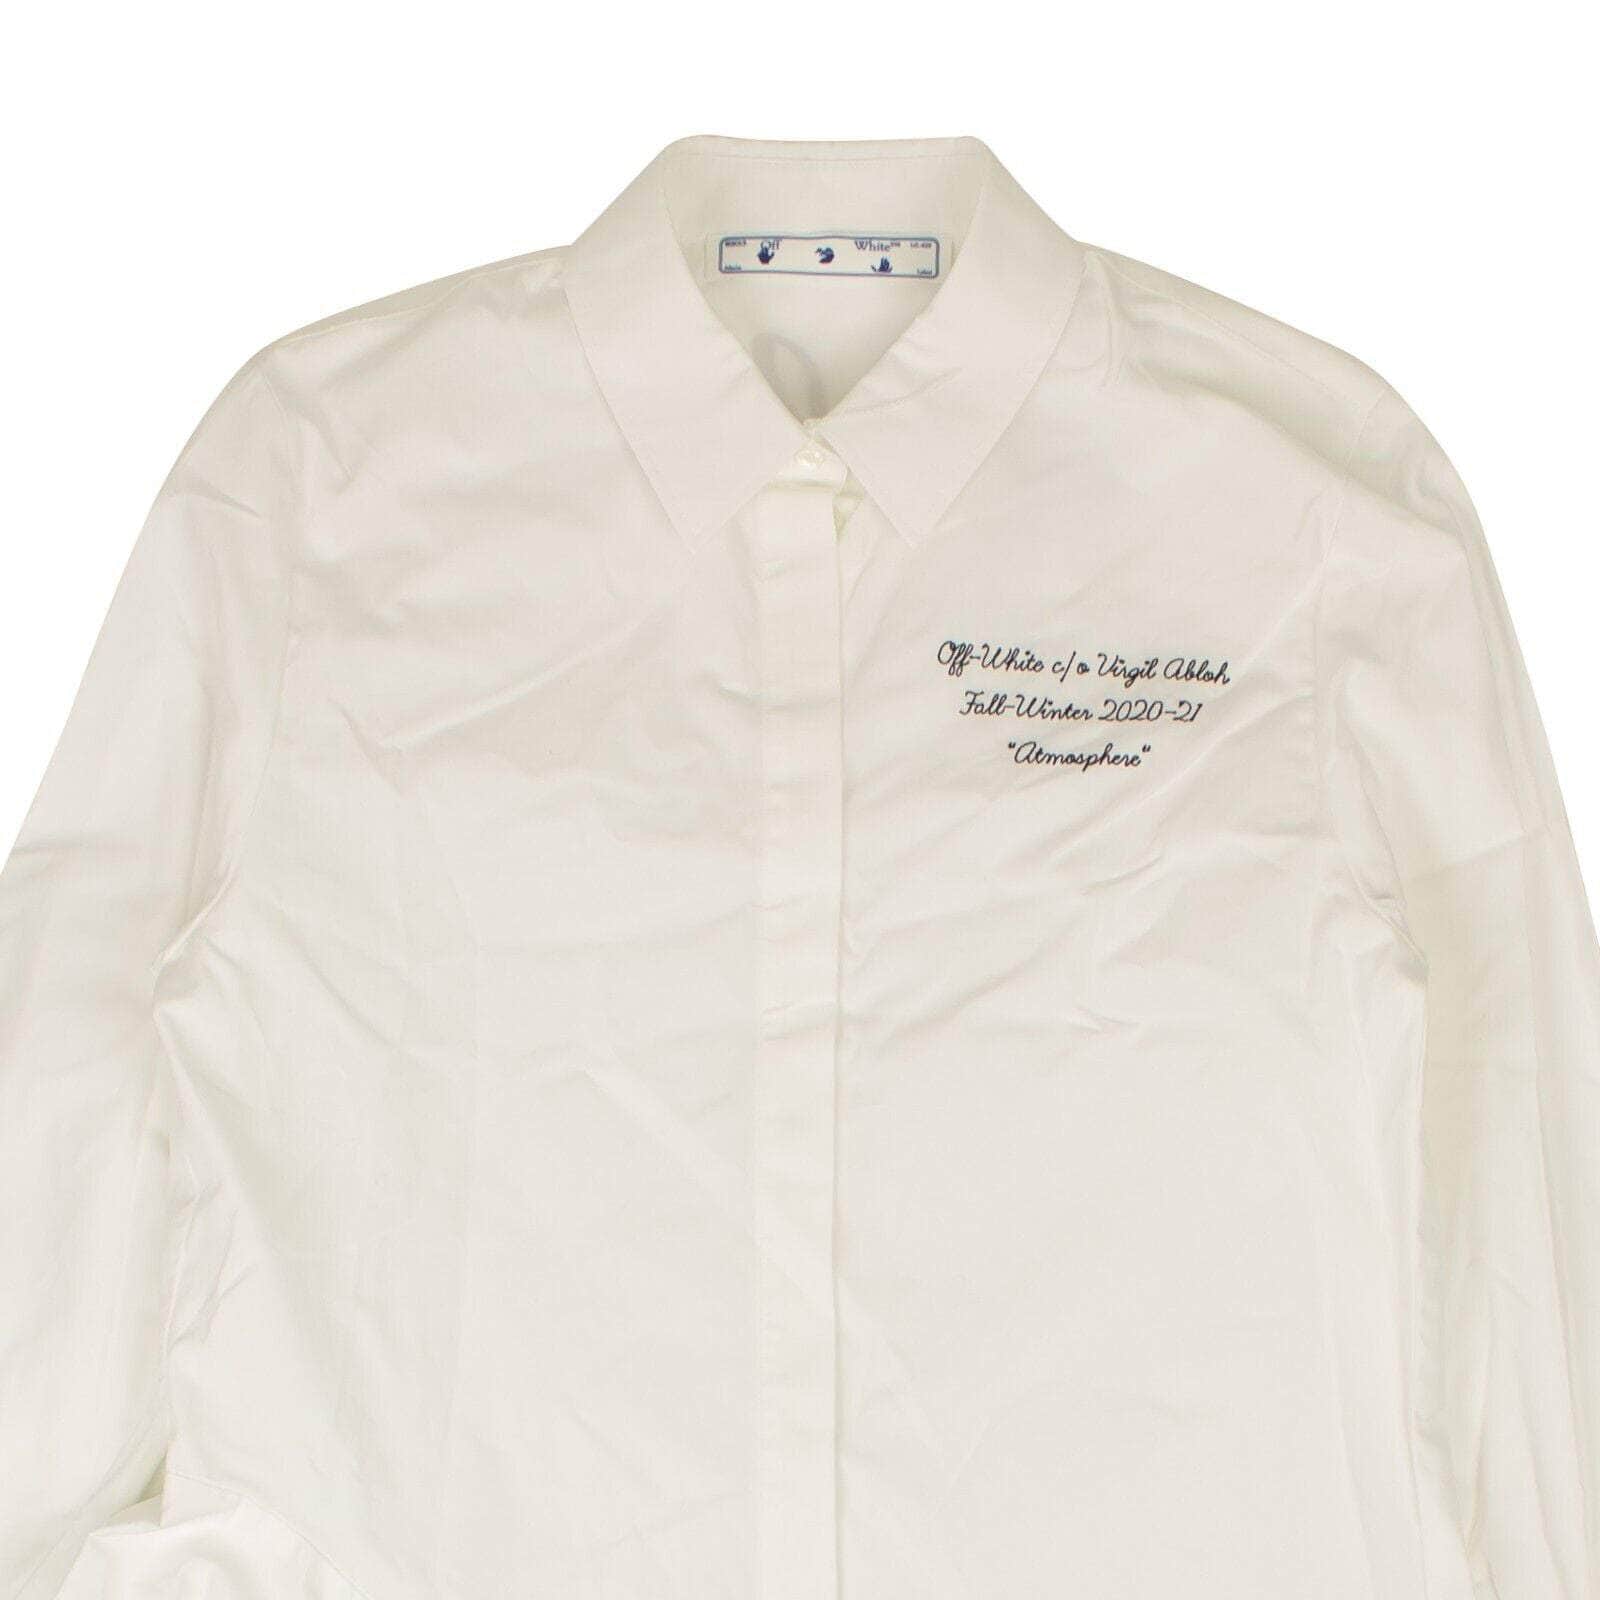 Off-White c/o Virgil Abloh 500-750, channelenable-all, chicmi, couponcollection, gender-womens, main-clothing, off-white-c-o-virgil-abloh, size-44, womens-shirt-dresses 44 White Asymmetric Poplin Dress OFW-XTPS-0051/44 OFW-XTPS-0051/44